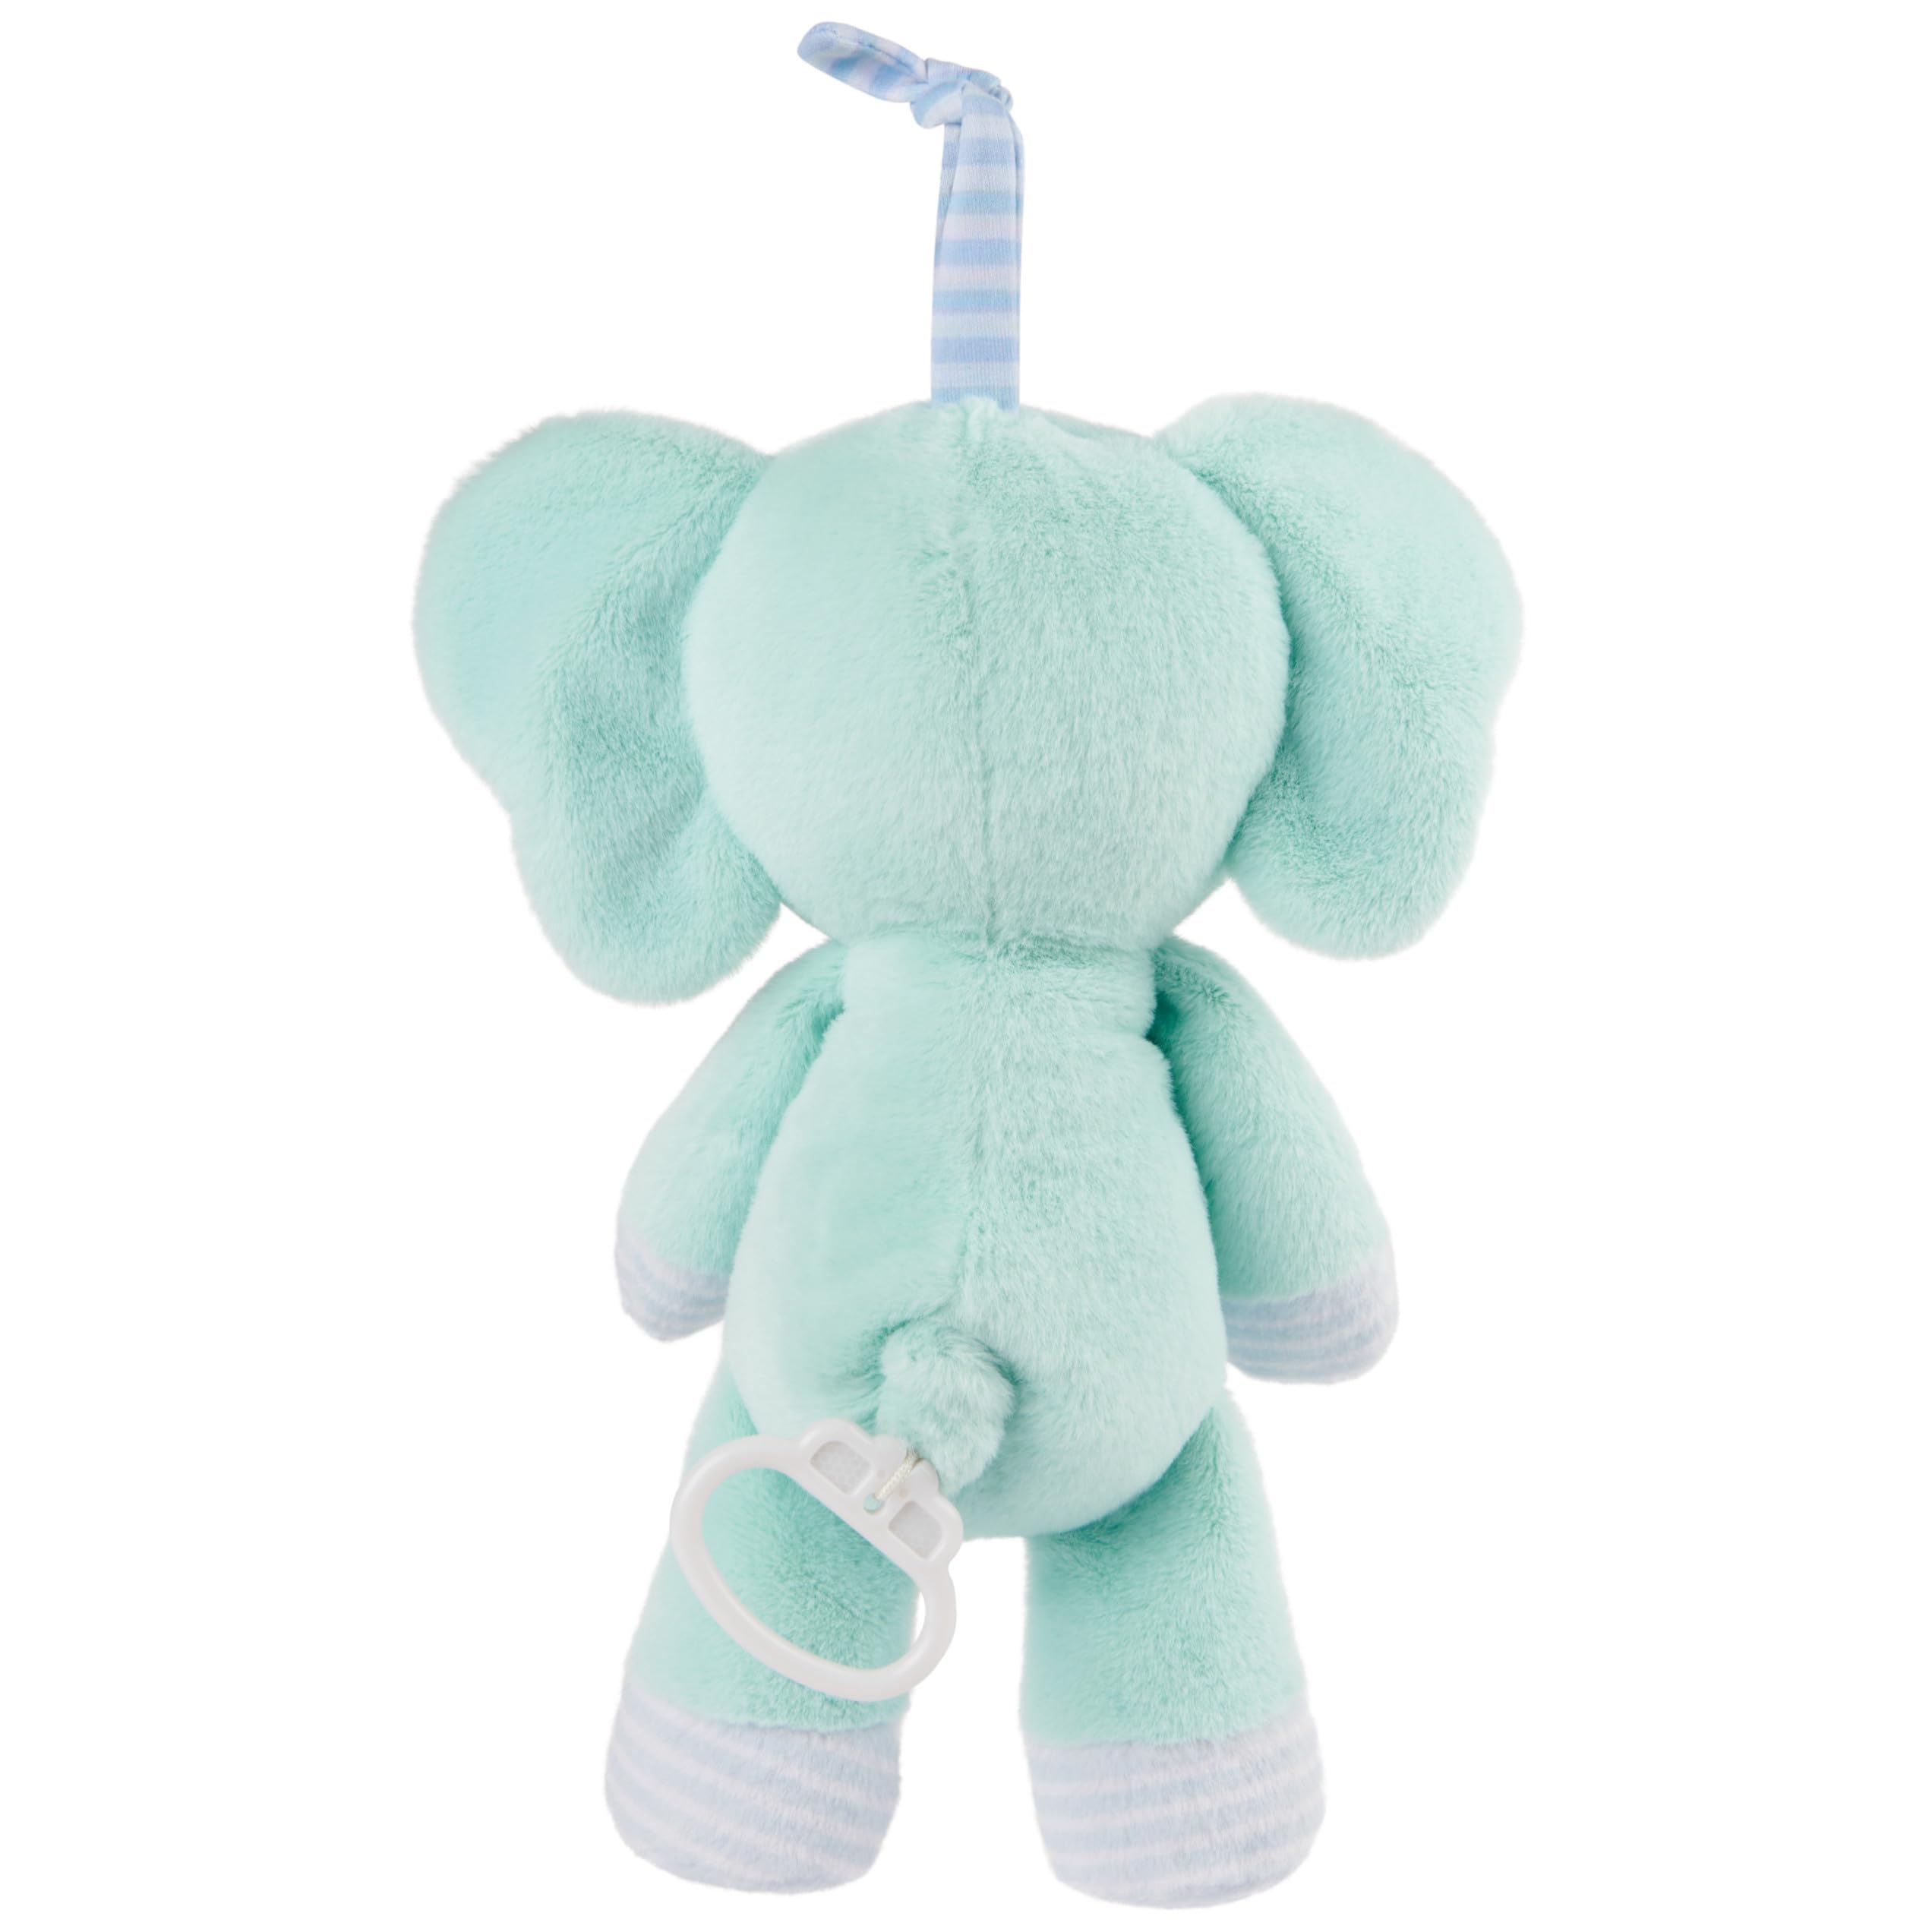 GUND Baby Safari Friends Elephant Pull-Down Musical Plush, Travel Friendly Sensory Toy with Stroller Loop for Ages 0 and Up, Blue, 12”